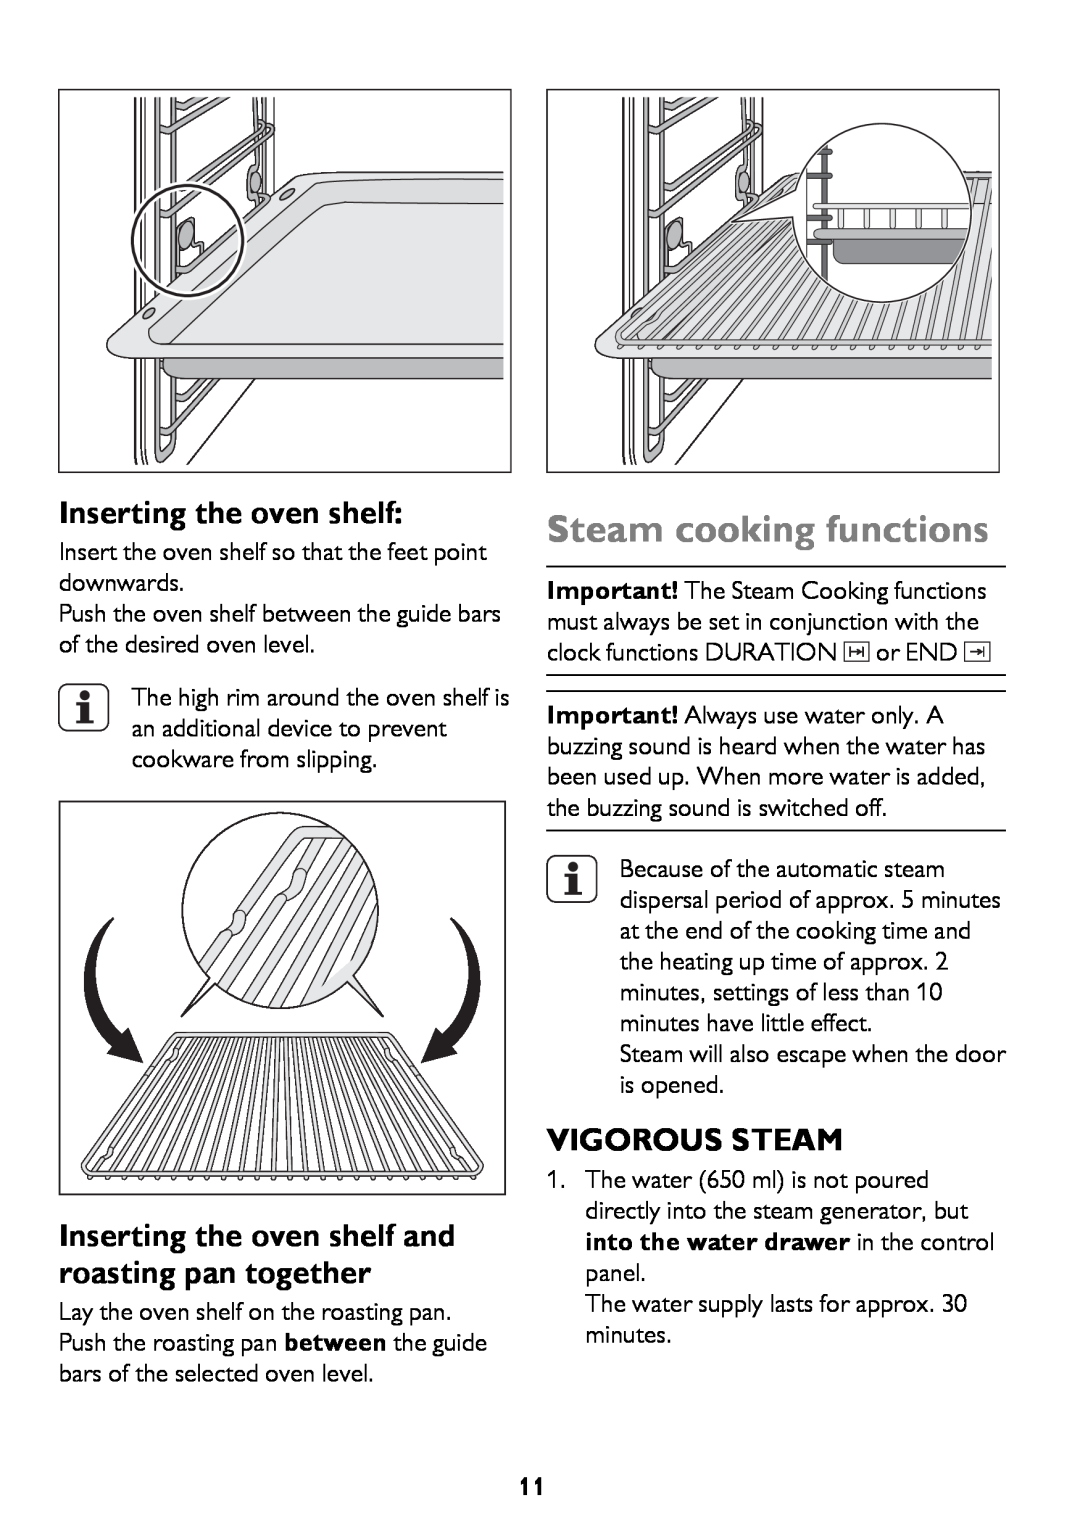 John Lewis JLBIOS610 instruction manual Steam cooking functions, Inserting the oven shelf, Vigorous Steam 